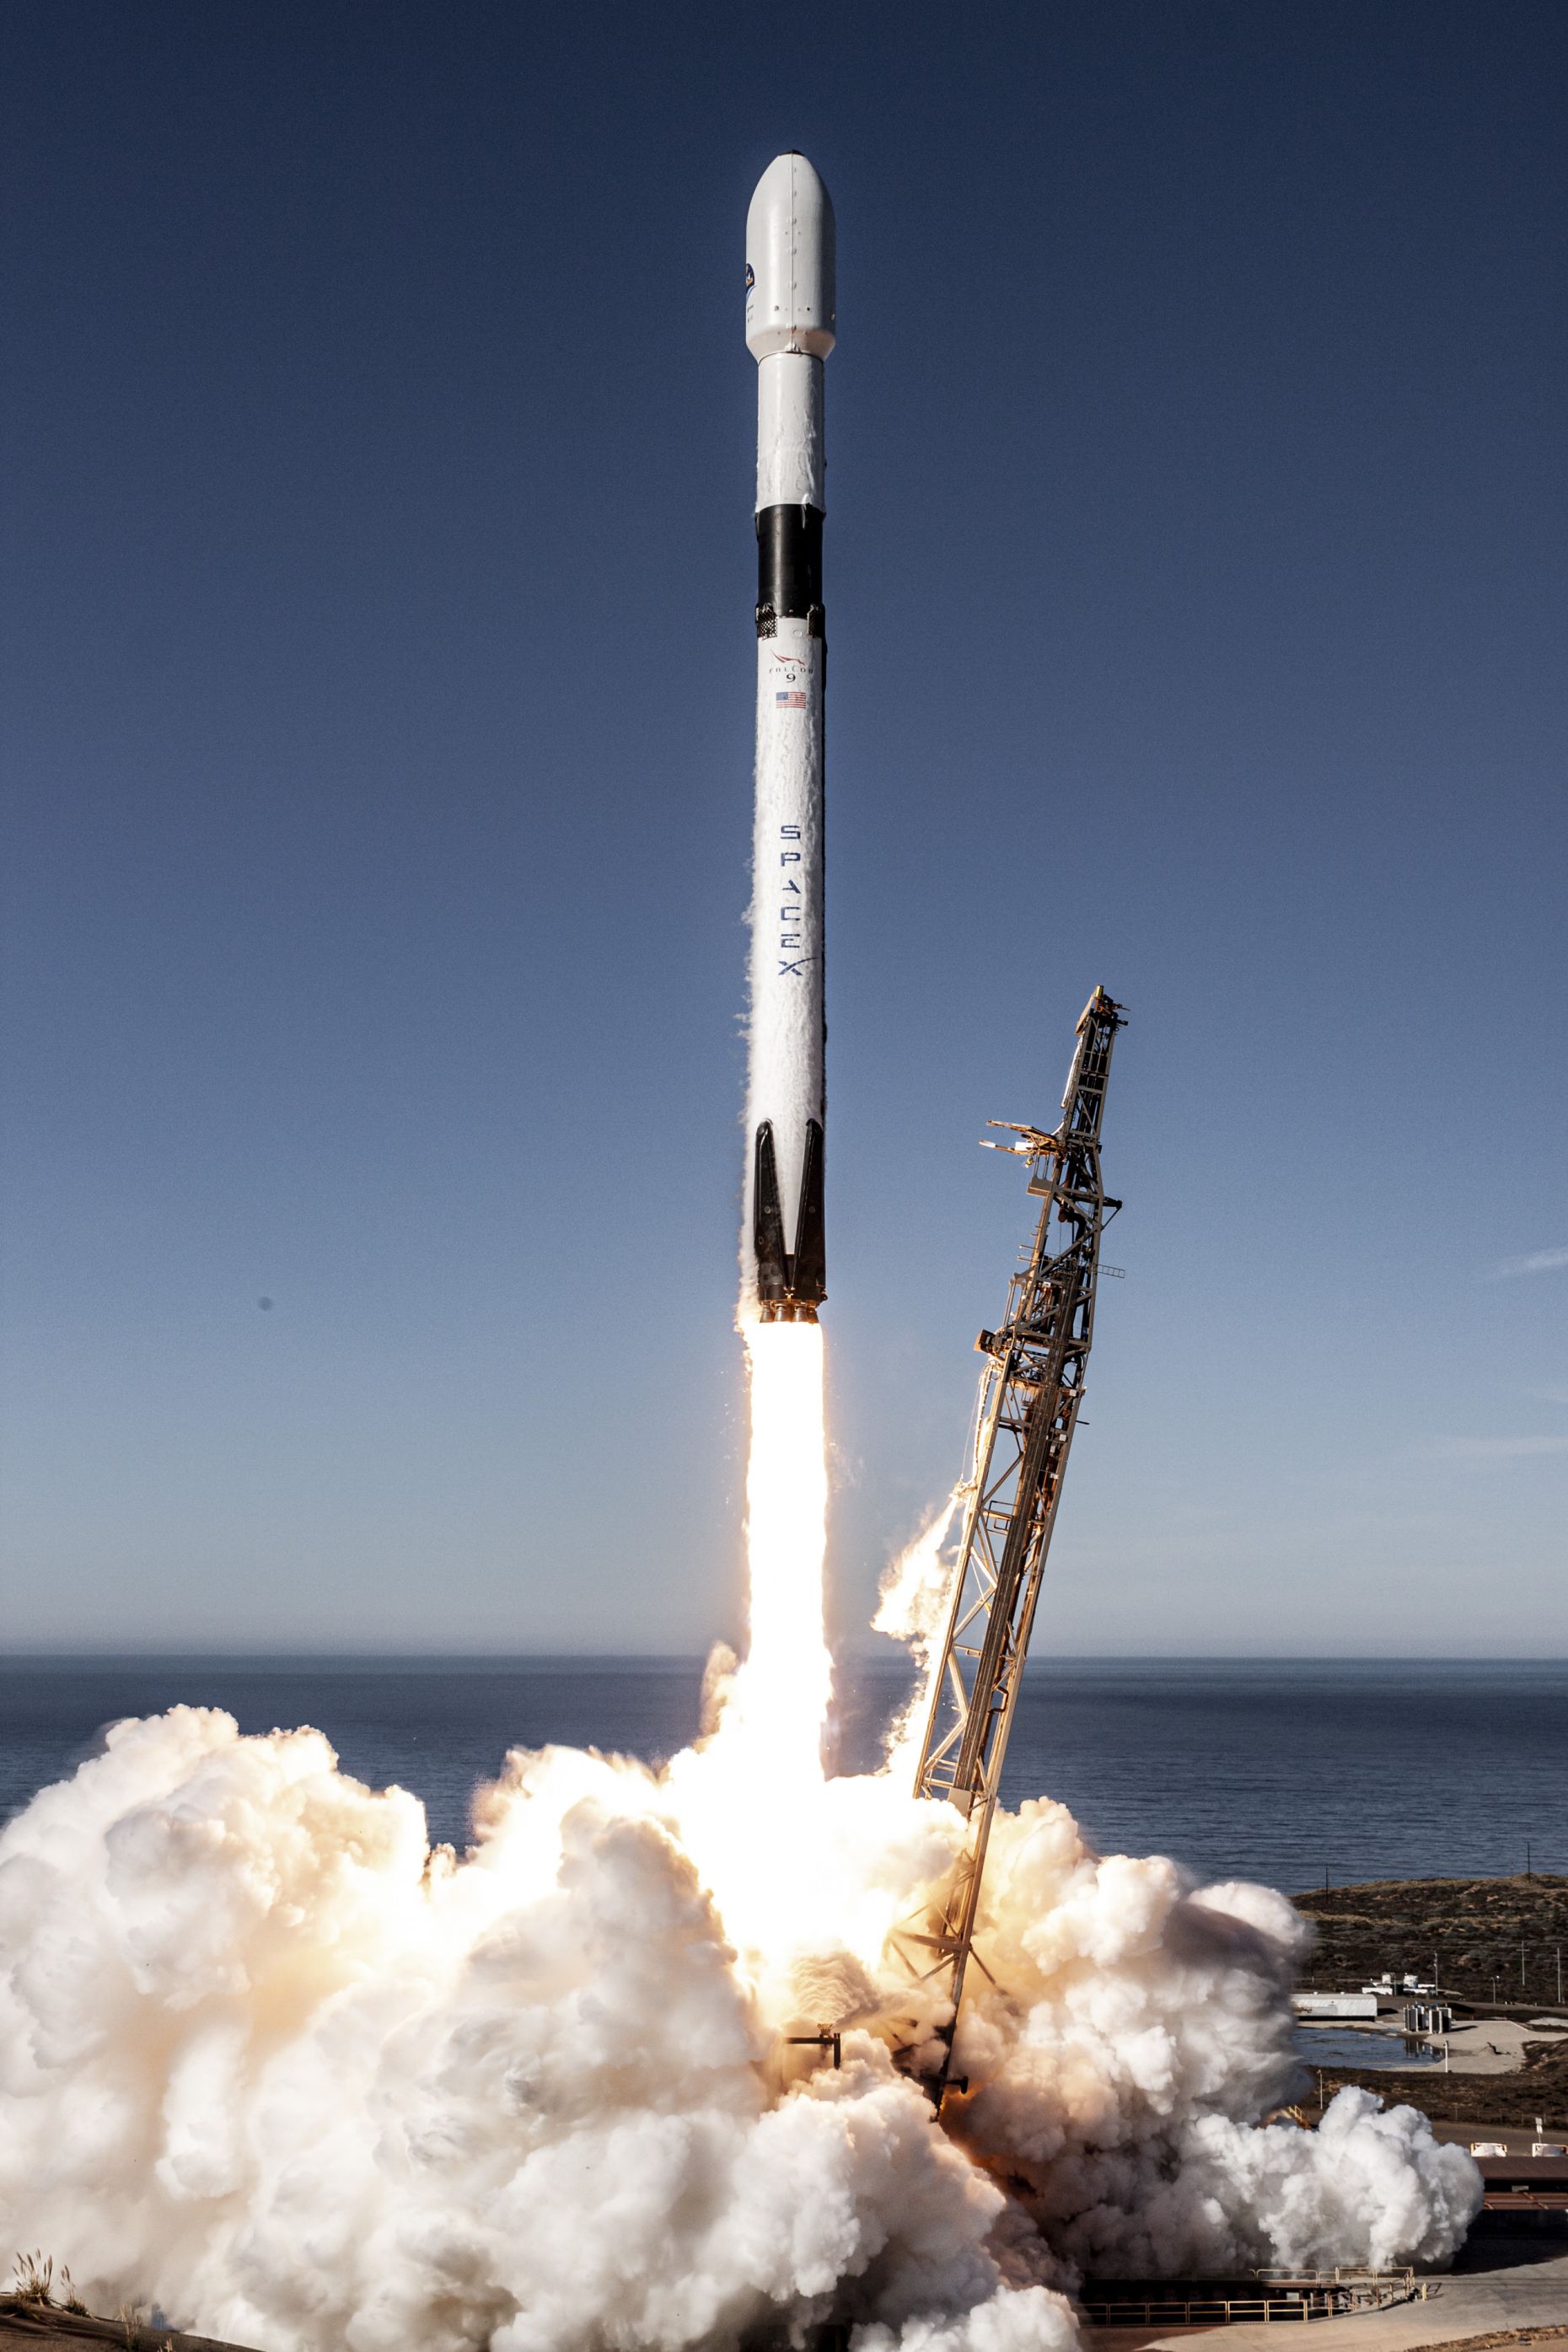 What an incredible image: Copernicus Satellite Sentinel6 Michael Freilich launches from Vandenberg Air Force Base atop a SpaceX Falcon9 rocket. 